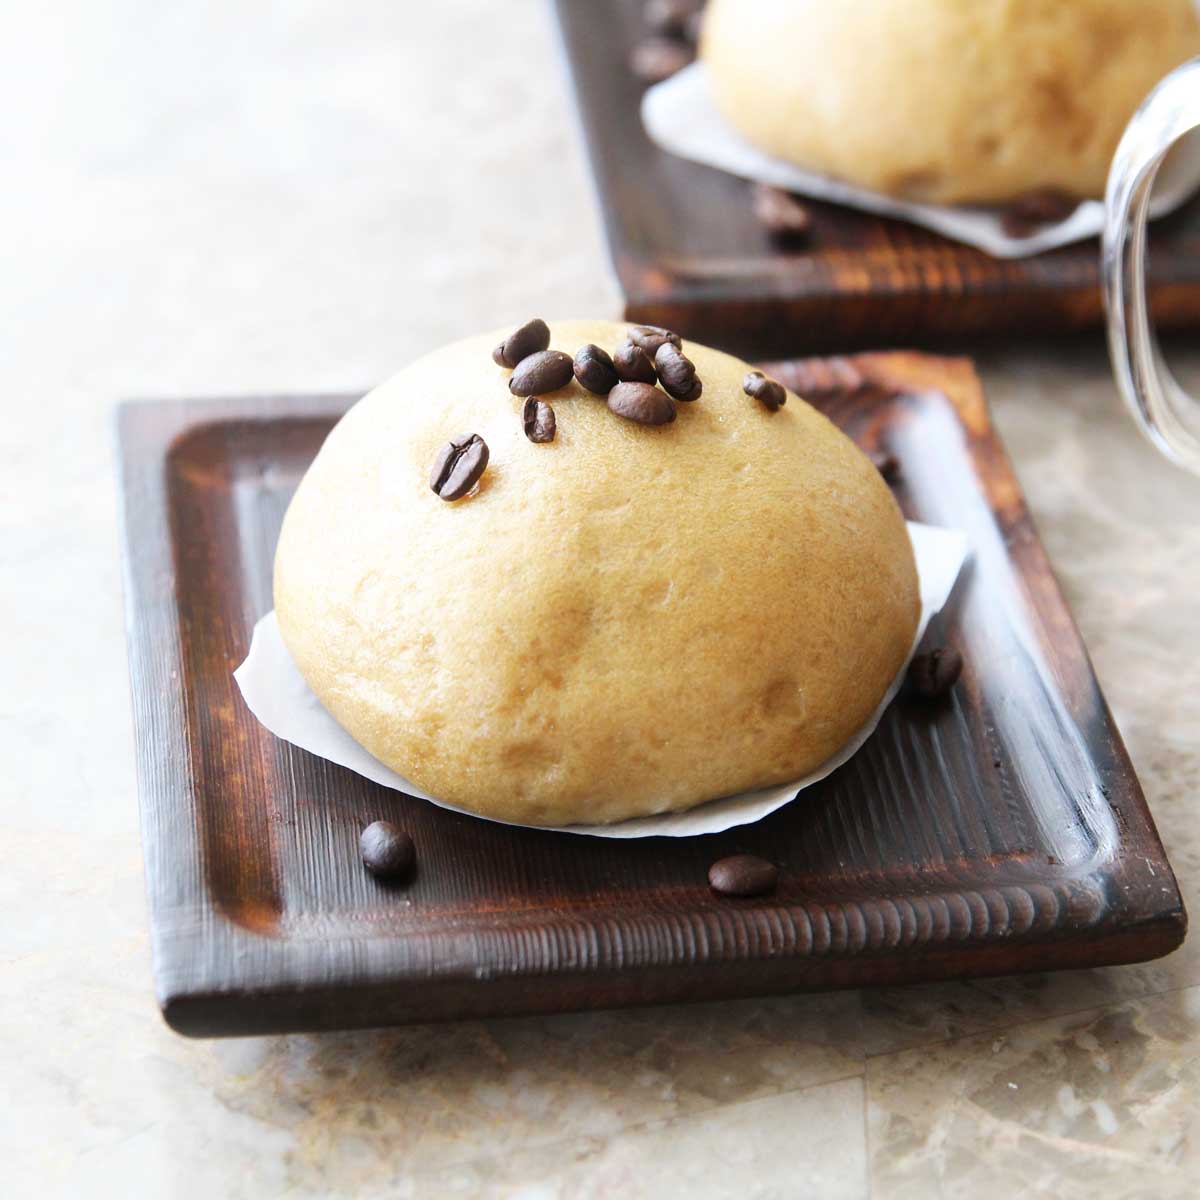 Easy Coffee & Almond Milk Steamed Buns with Creamy Coffee Paste Filling - Flatbread Pizza Ideas